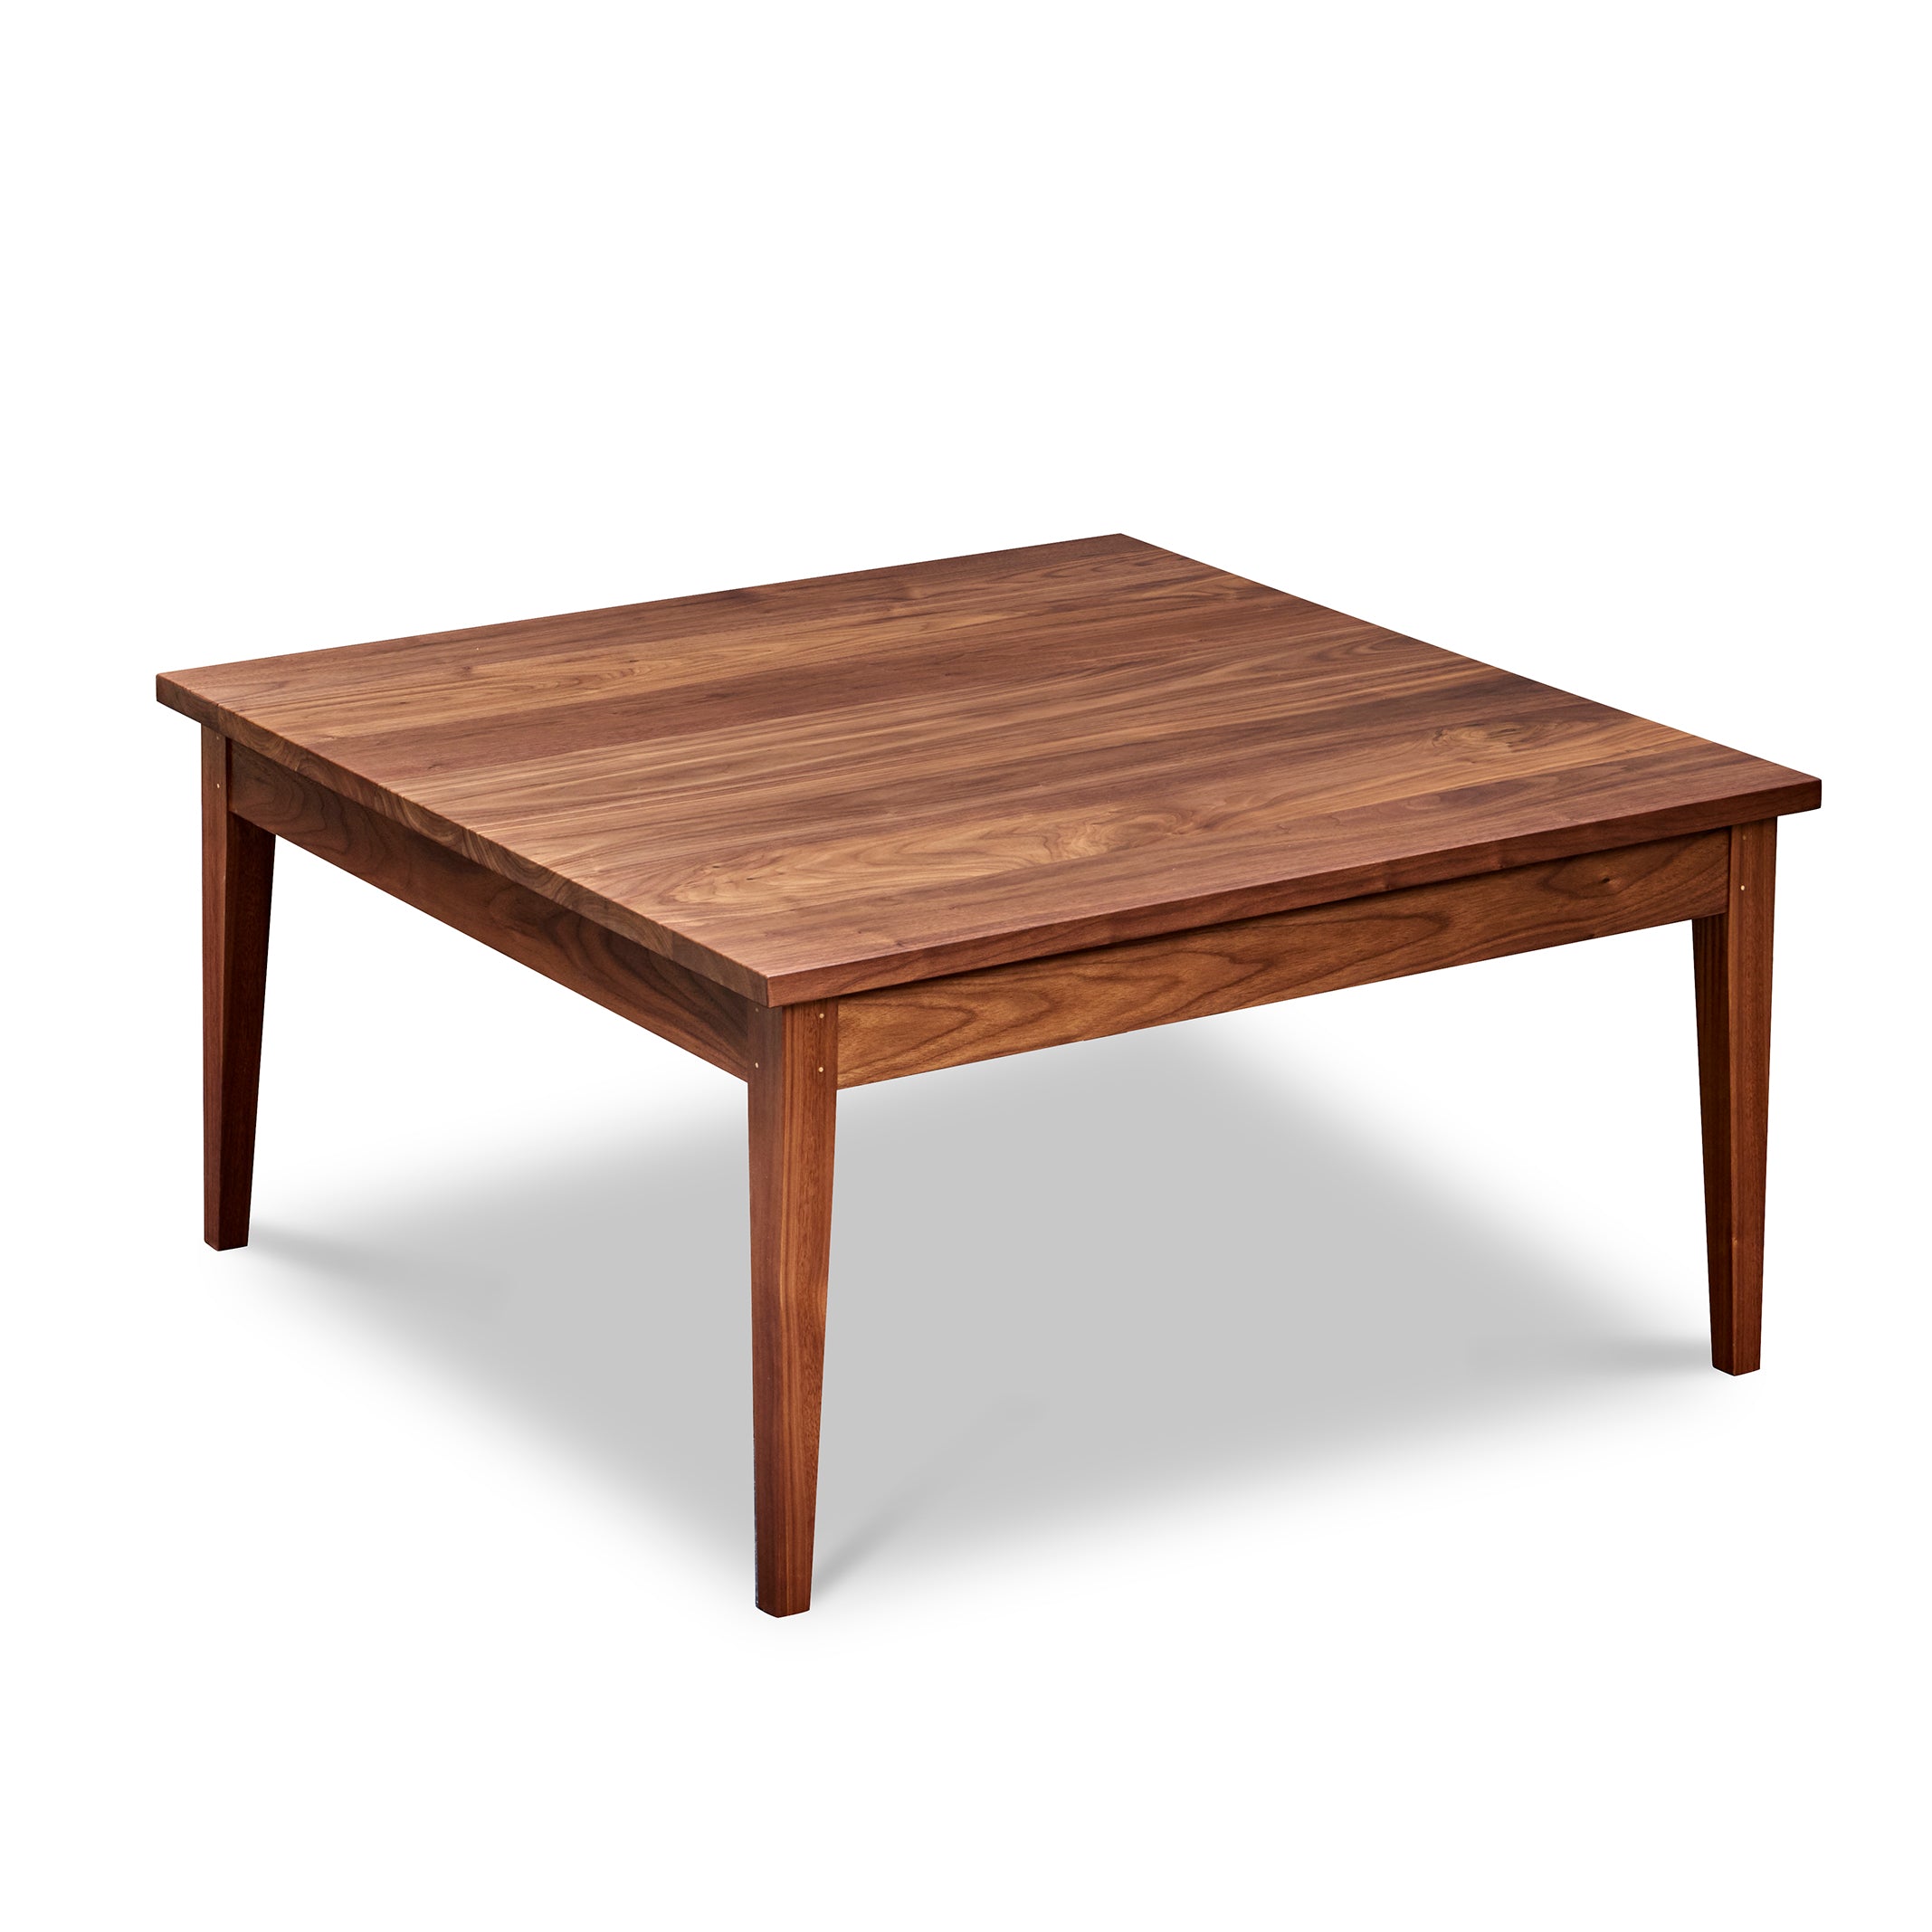 Simple Shaker style square coffee table in wanut